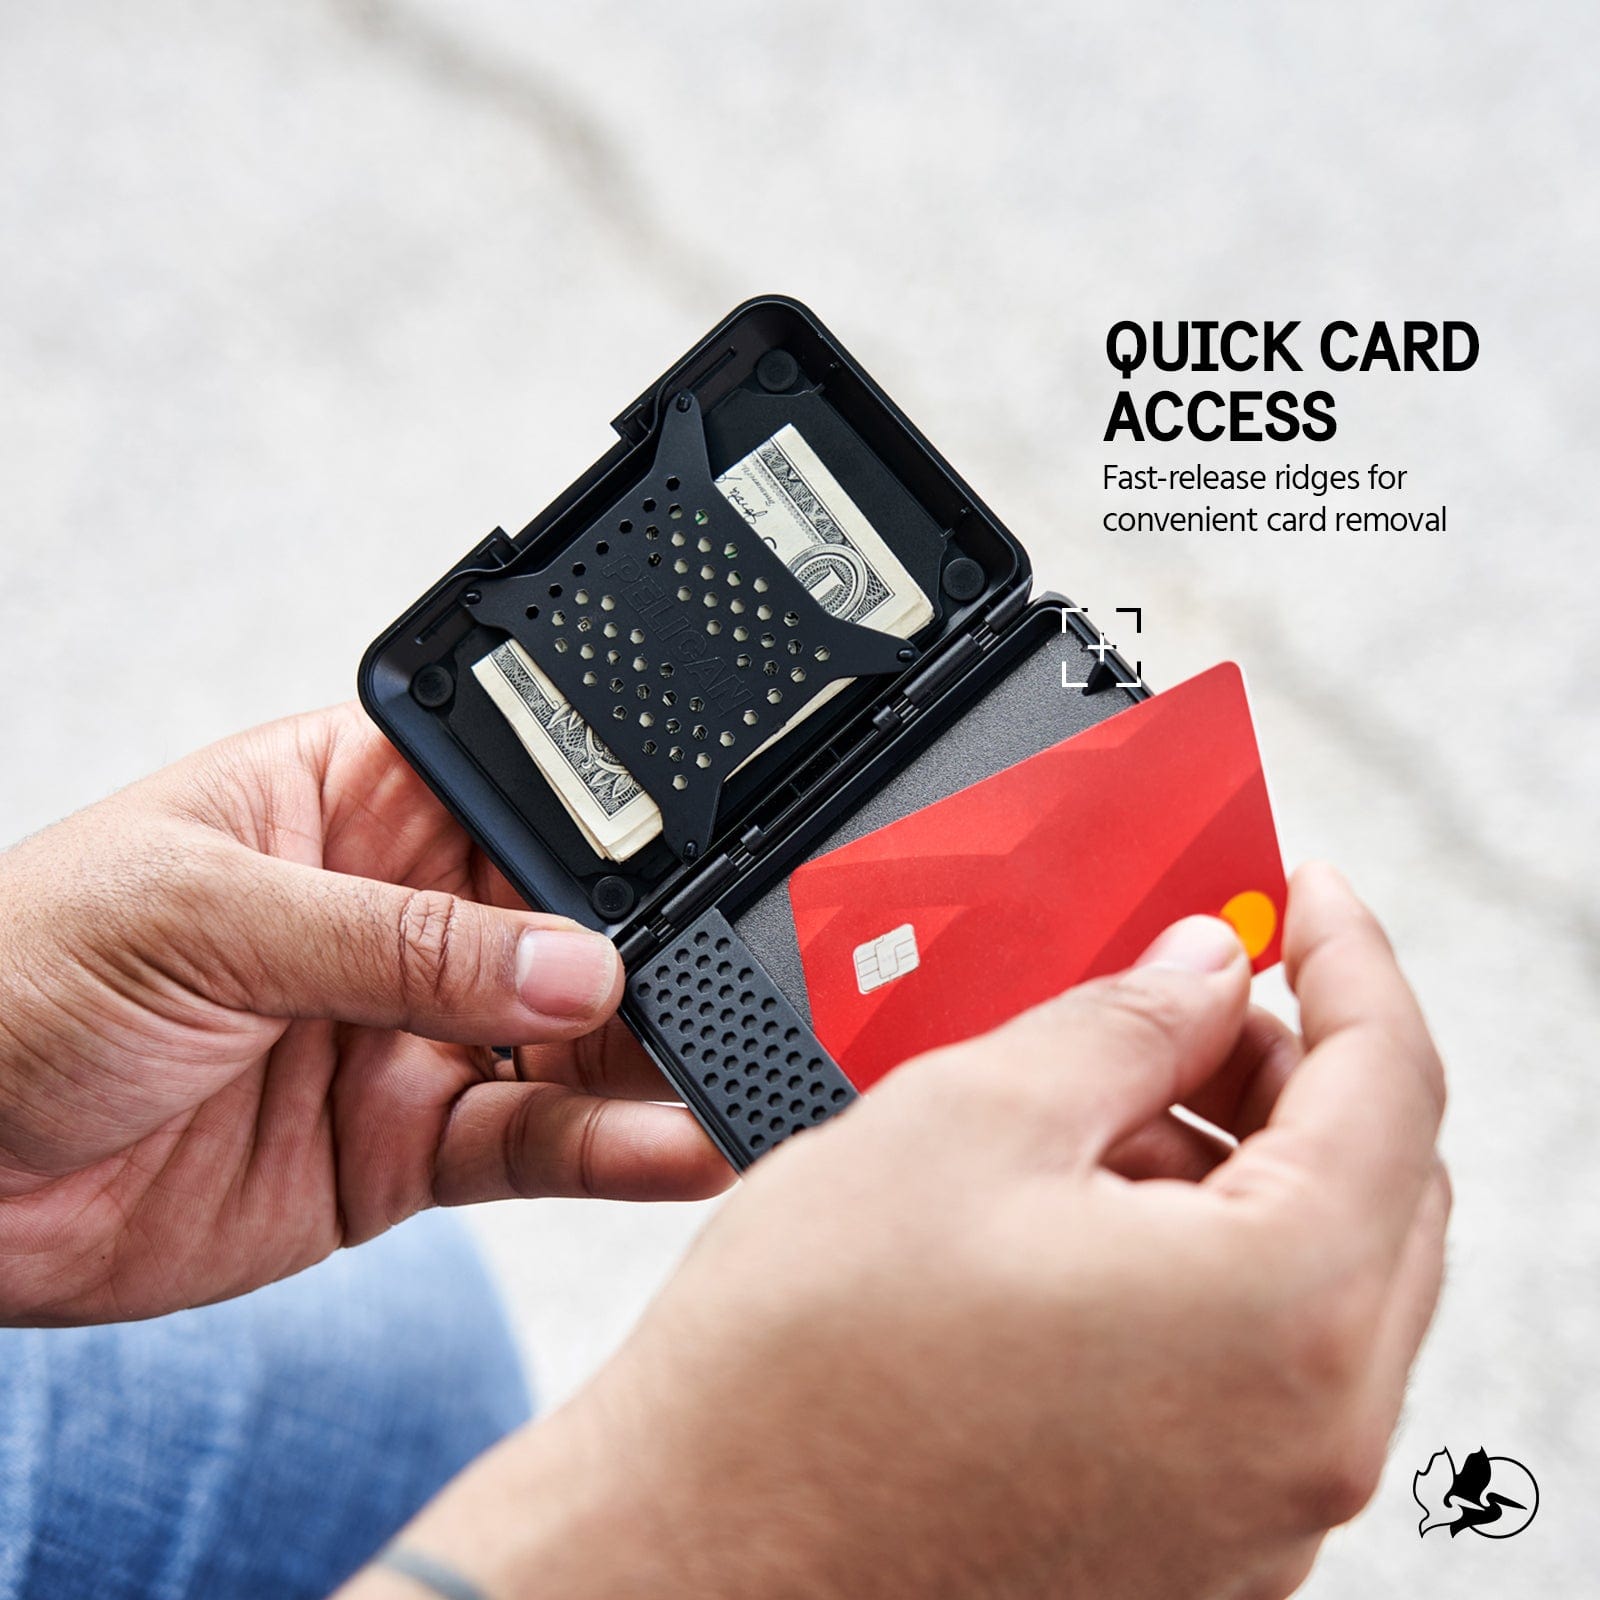 QUICK CARD ACCESS. FAST-RELEASE RIDGES FOR CONVENIENT CARD REMOVAL.